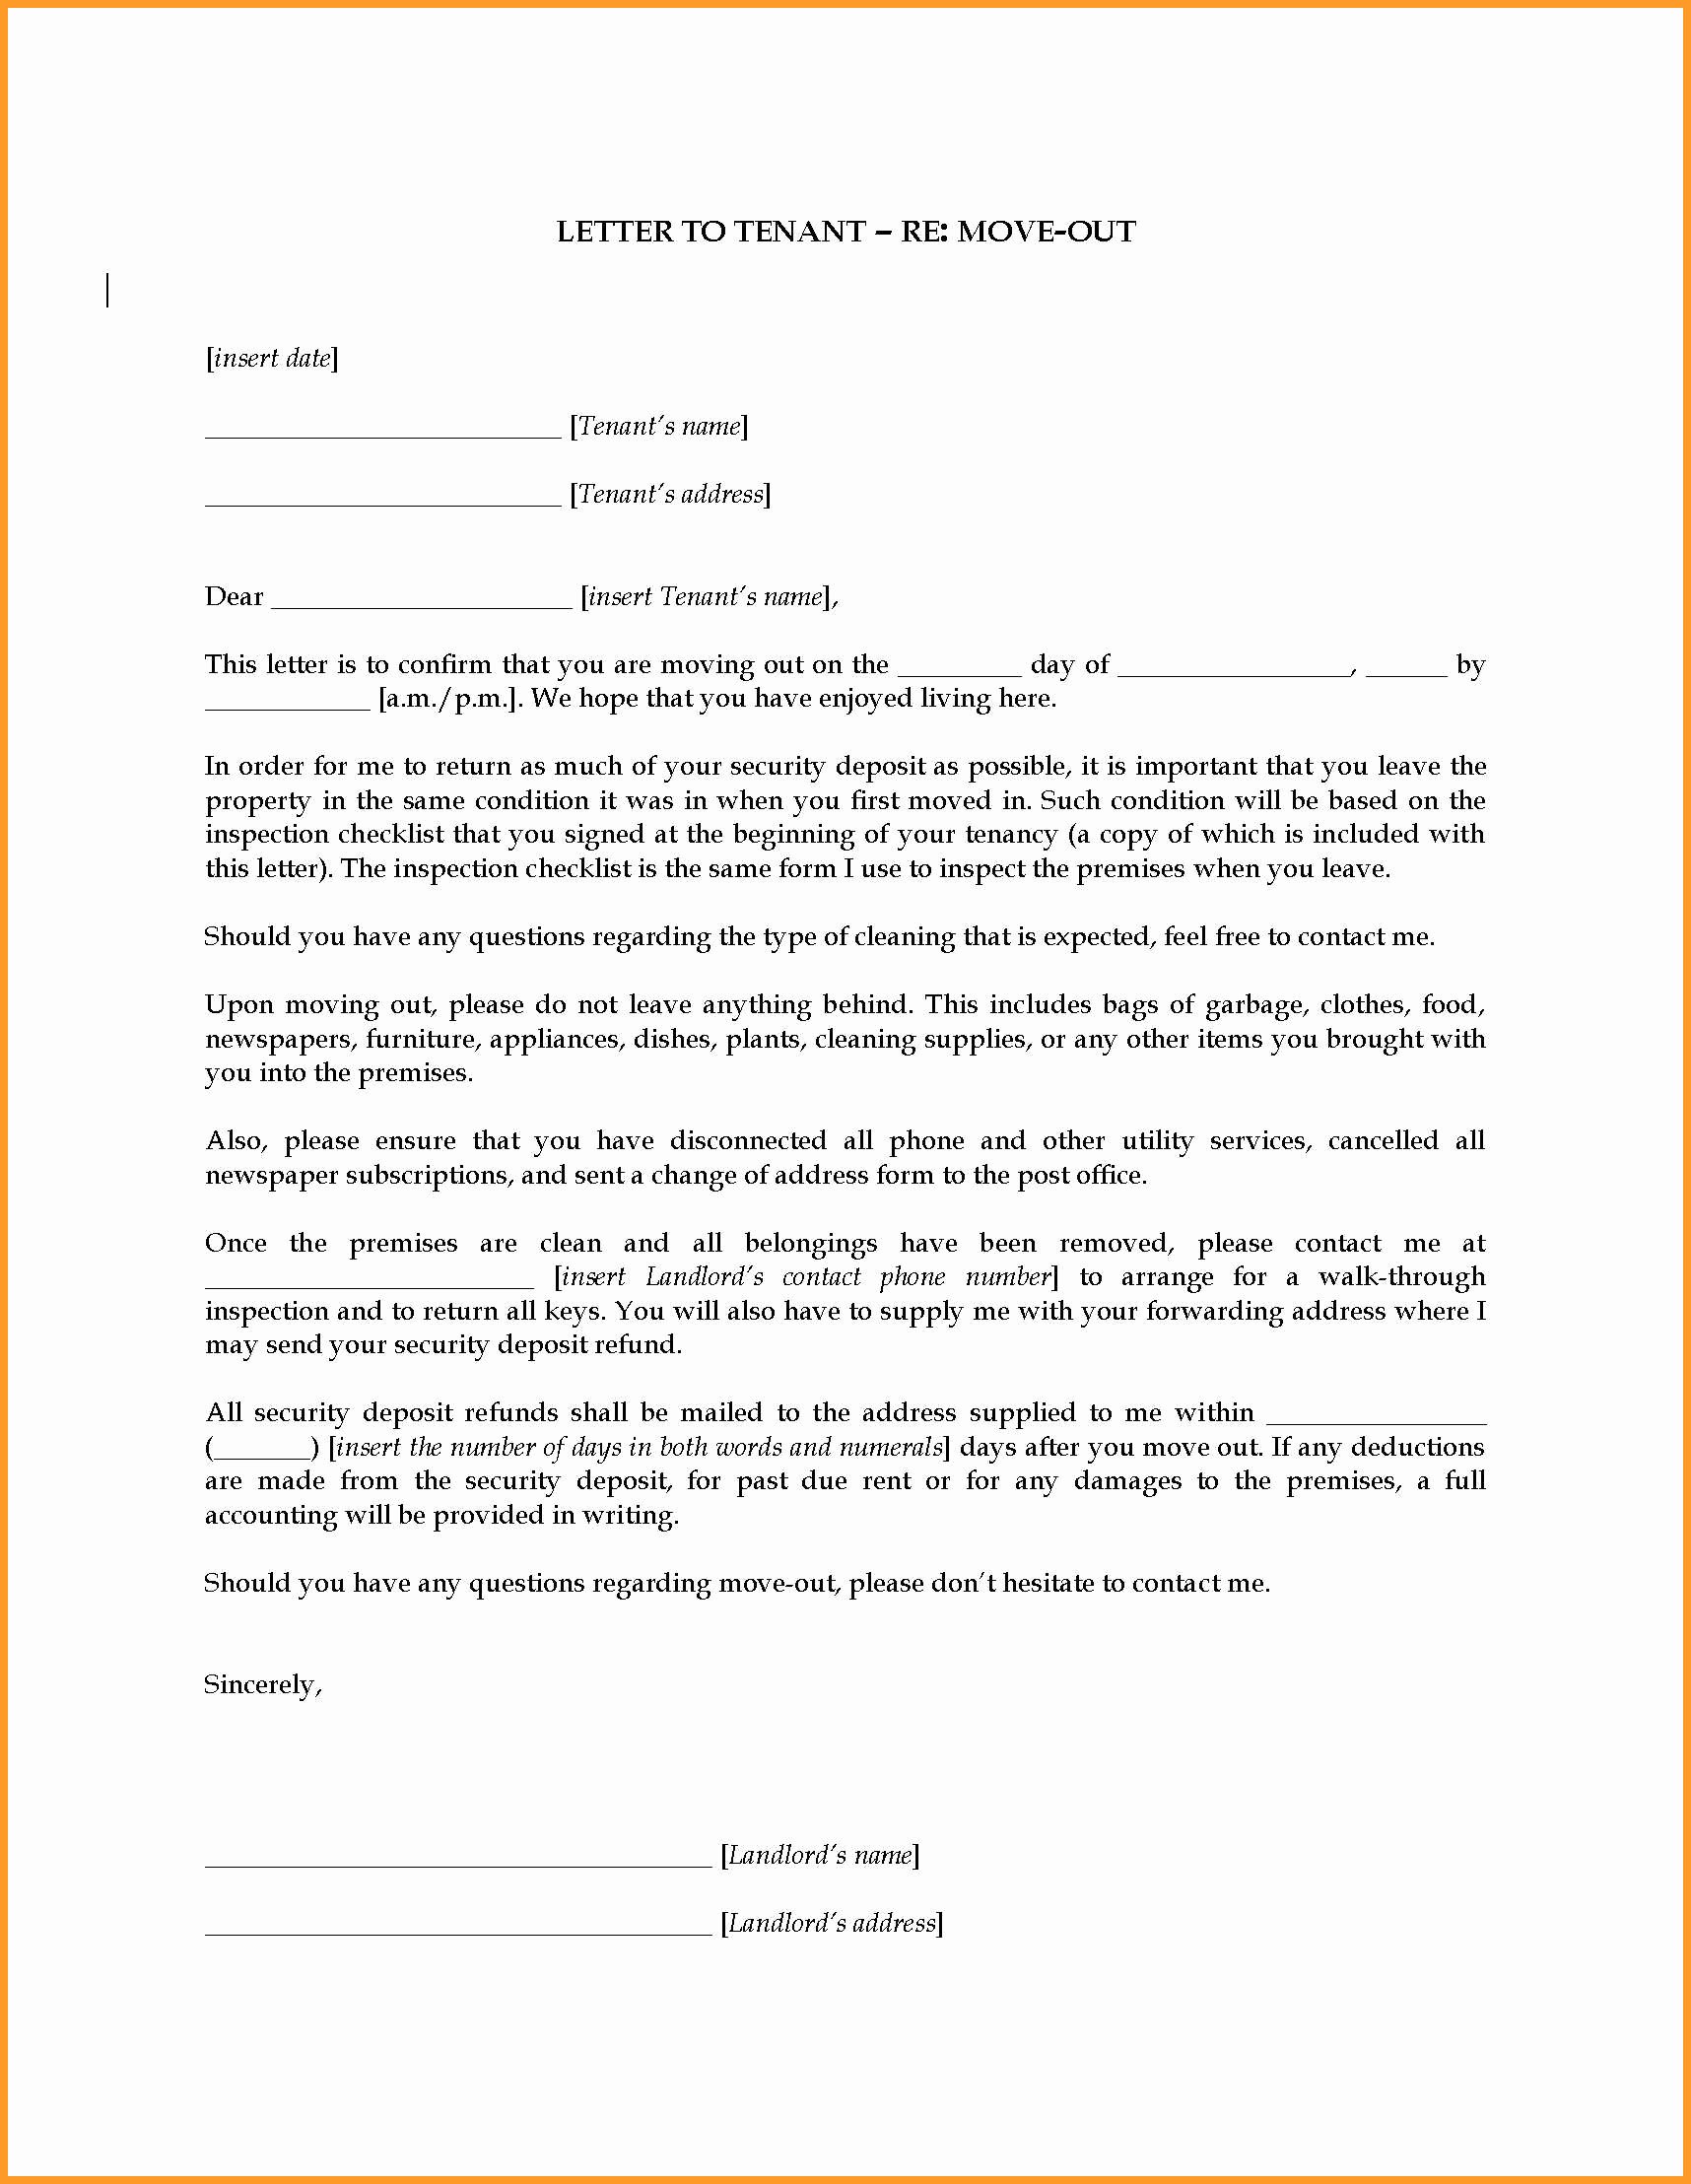 Move Out Letter Template Inspirational 2 3 Landlord Letter to Tenant Move Out